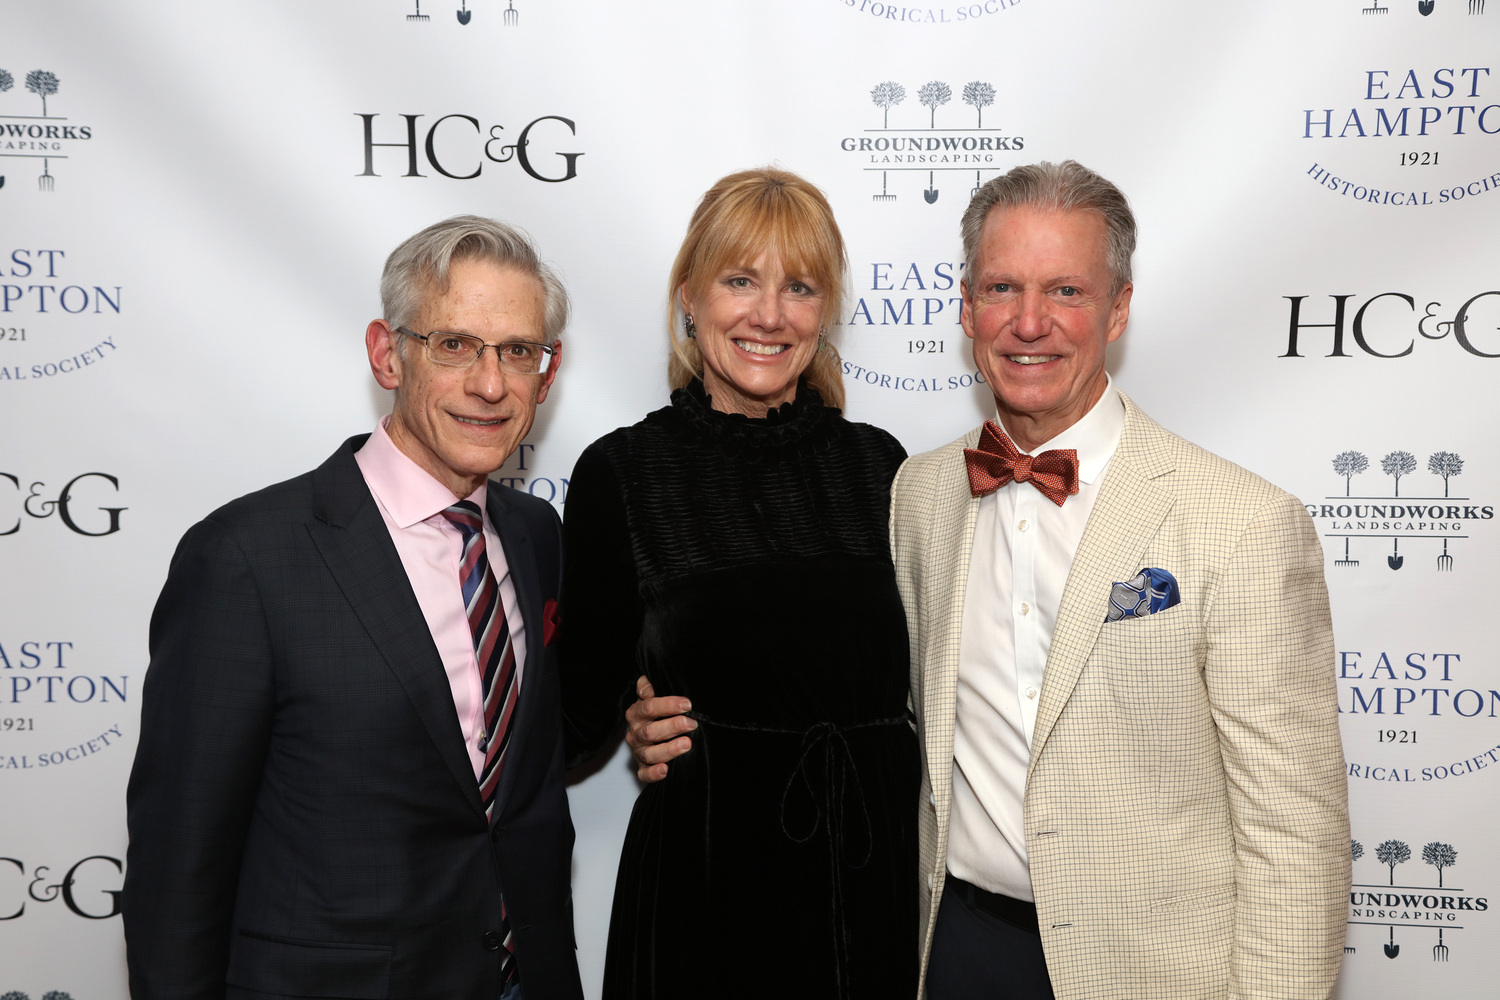 Paul Sparks, Pamela Eldridge and Marshall Watson at the Maidstone for the East Hampton House & Garden tour kick-off cocktail party on Friday. ROSSA COLE